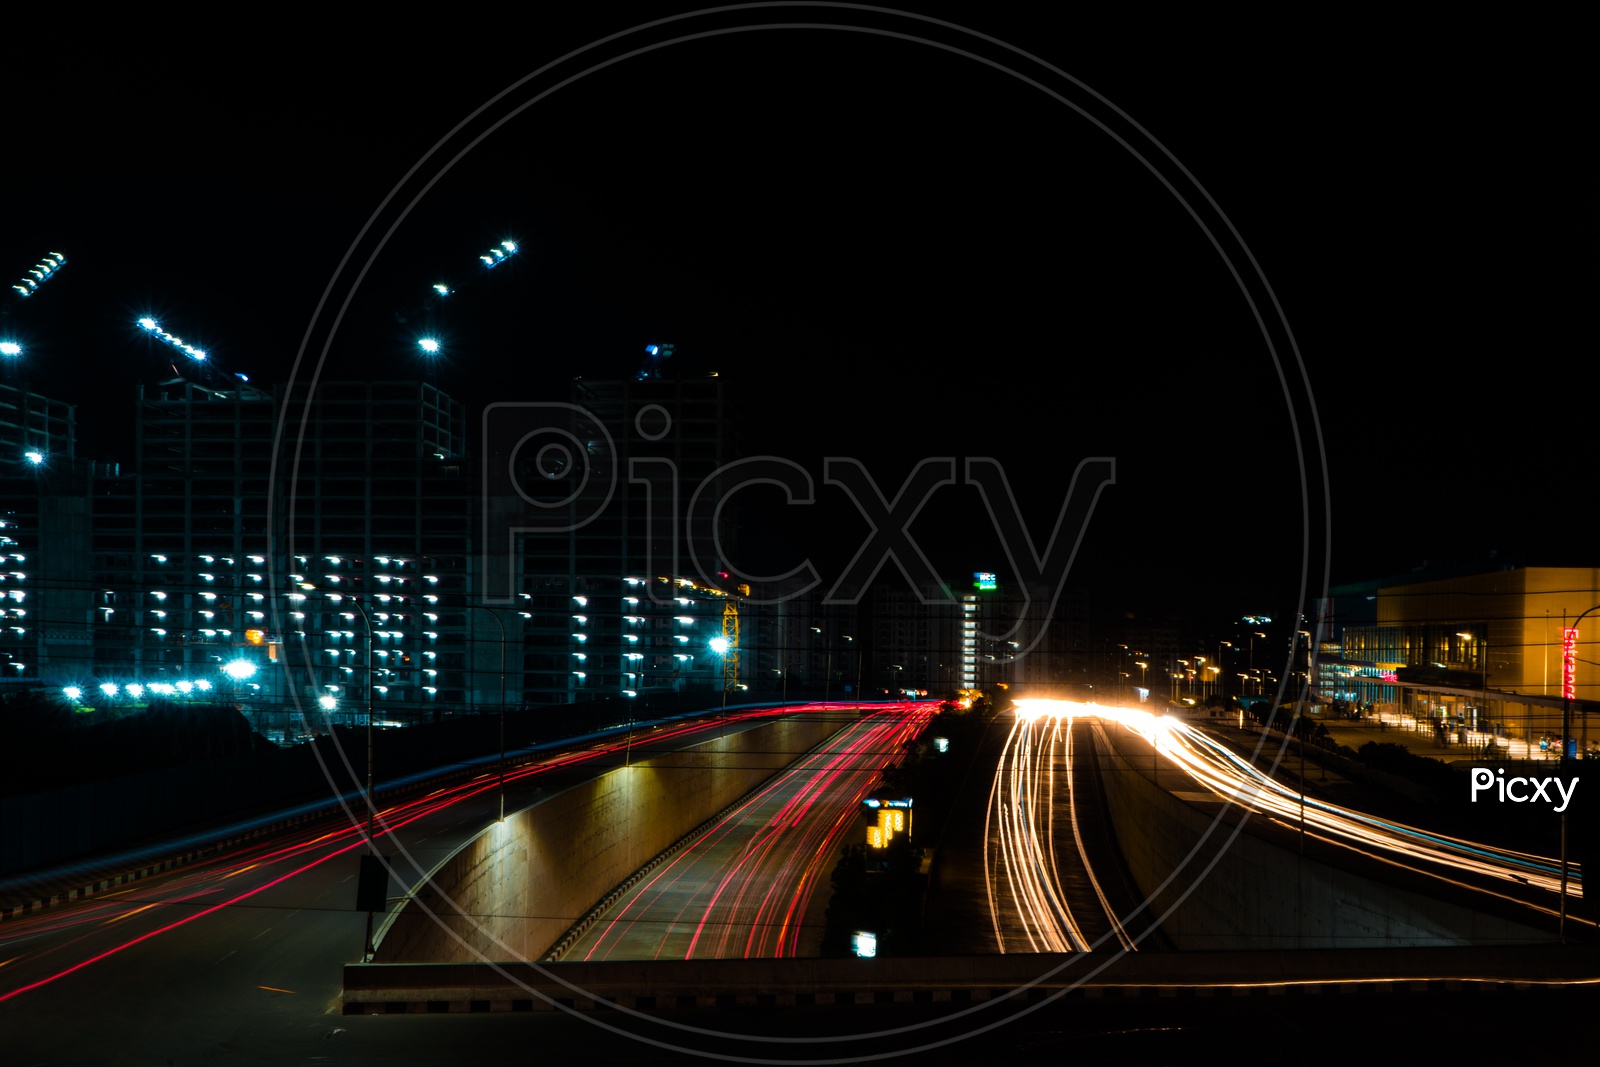 Long exposure shot from a flyover